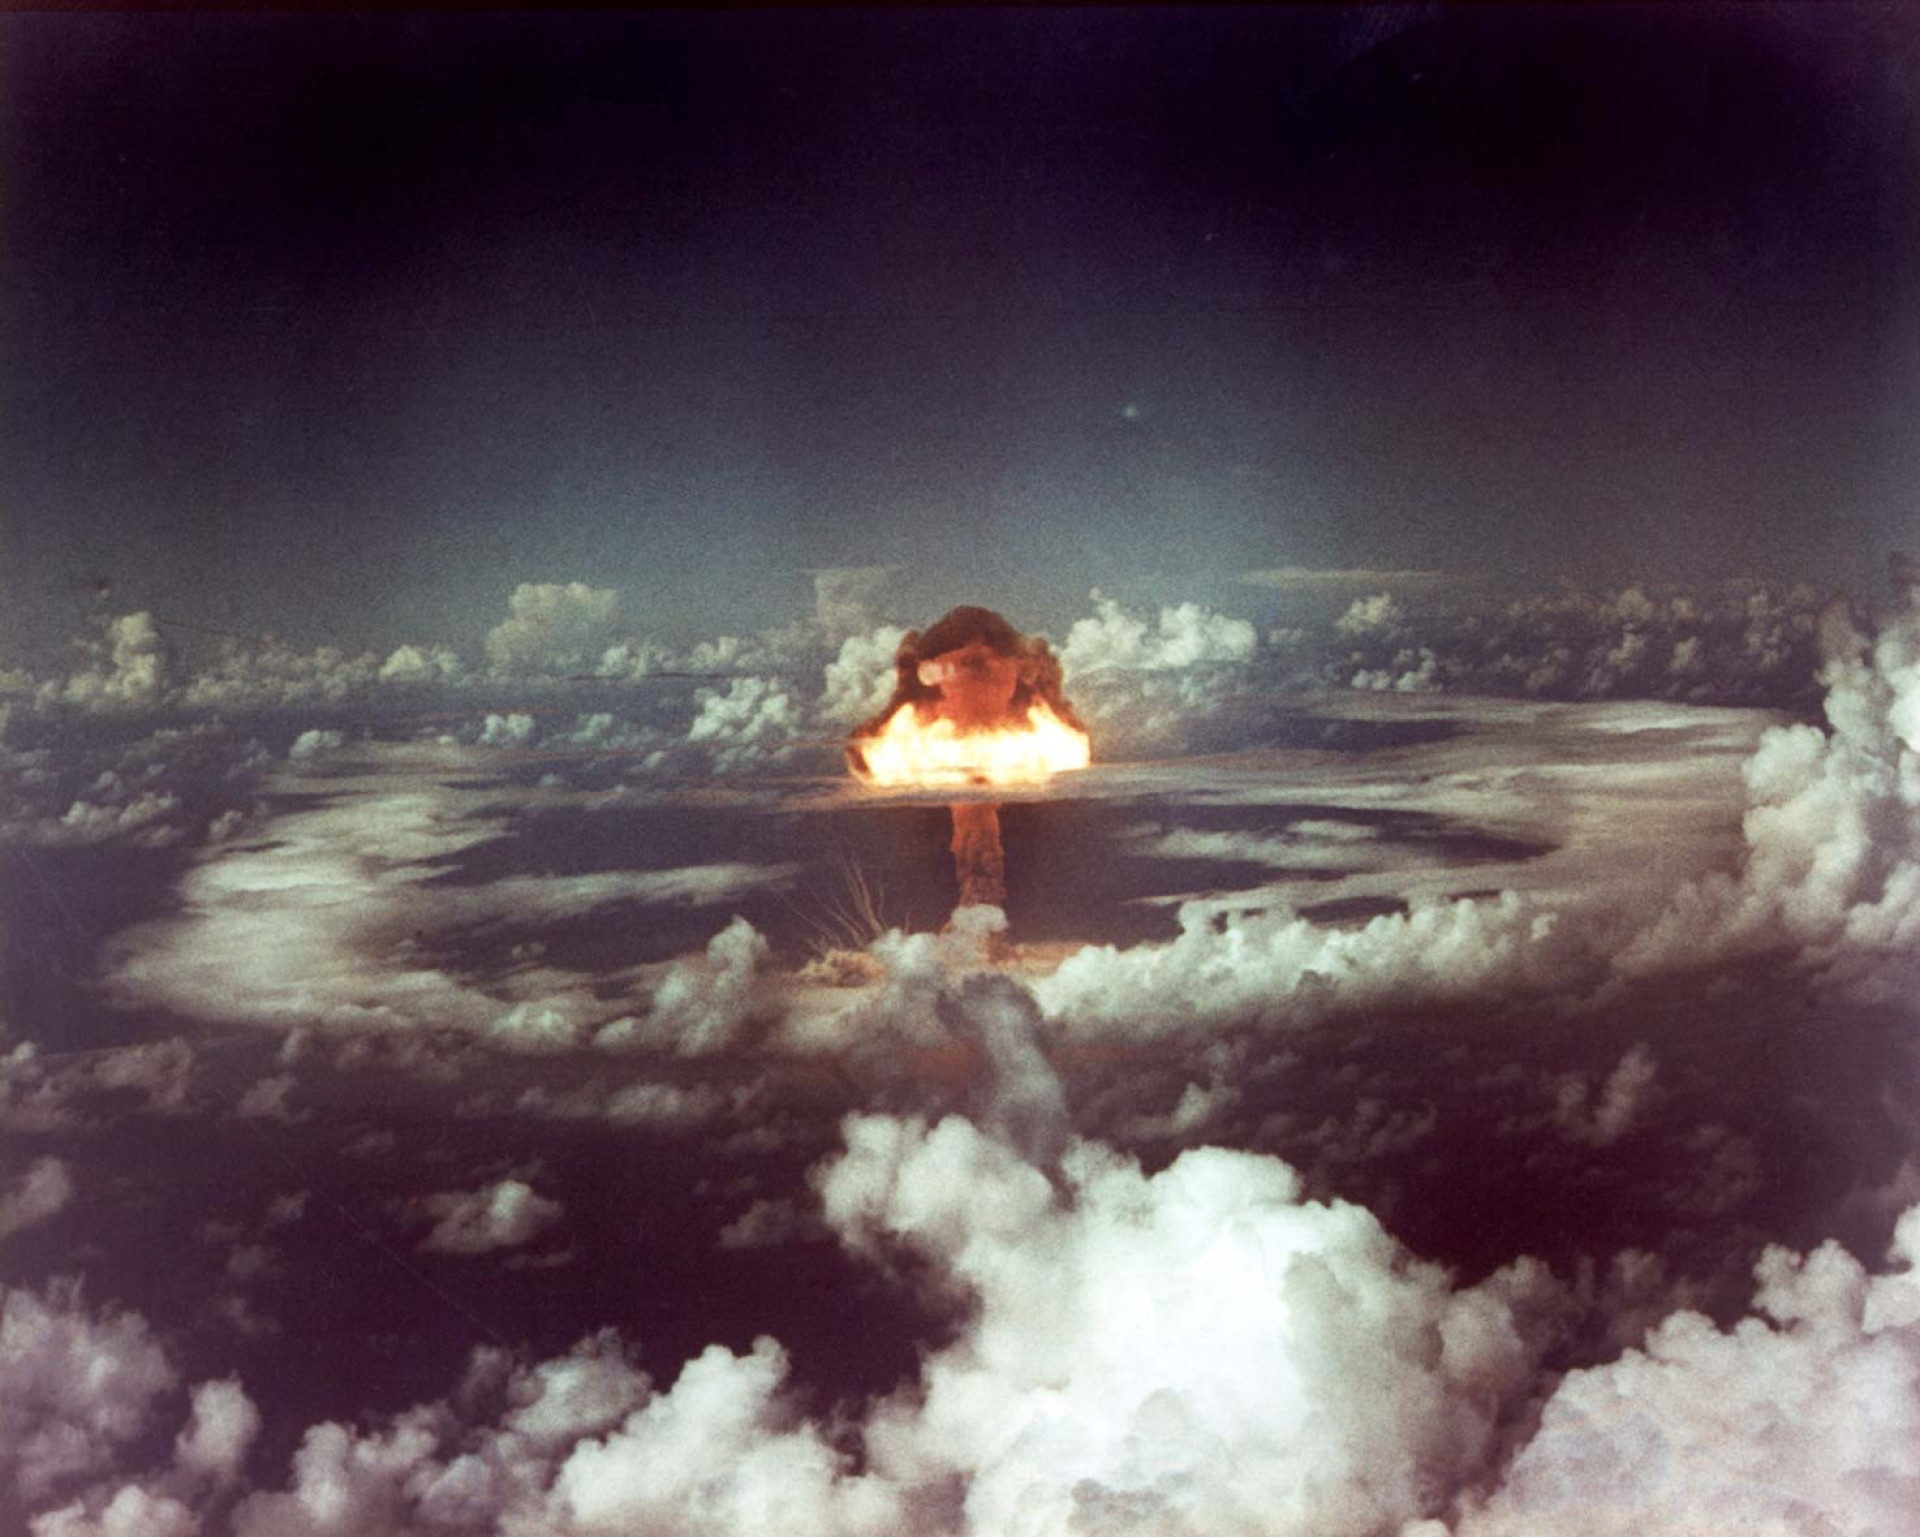 <p>Between 1946 and 1962, the US military conducted 105 atmospheric nuclear tests over the Marshall Islands and several other nearby South Pacific atolls.</p><p>You may also like:<a href="https://www.starsinsider.com/n/382533?utm_source=msn.com&utm_medium=display&utm_campaign=referral_description&utm_content=686881en-us"> The best ever stage-to-screen musicals</a></p>